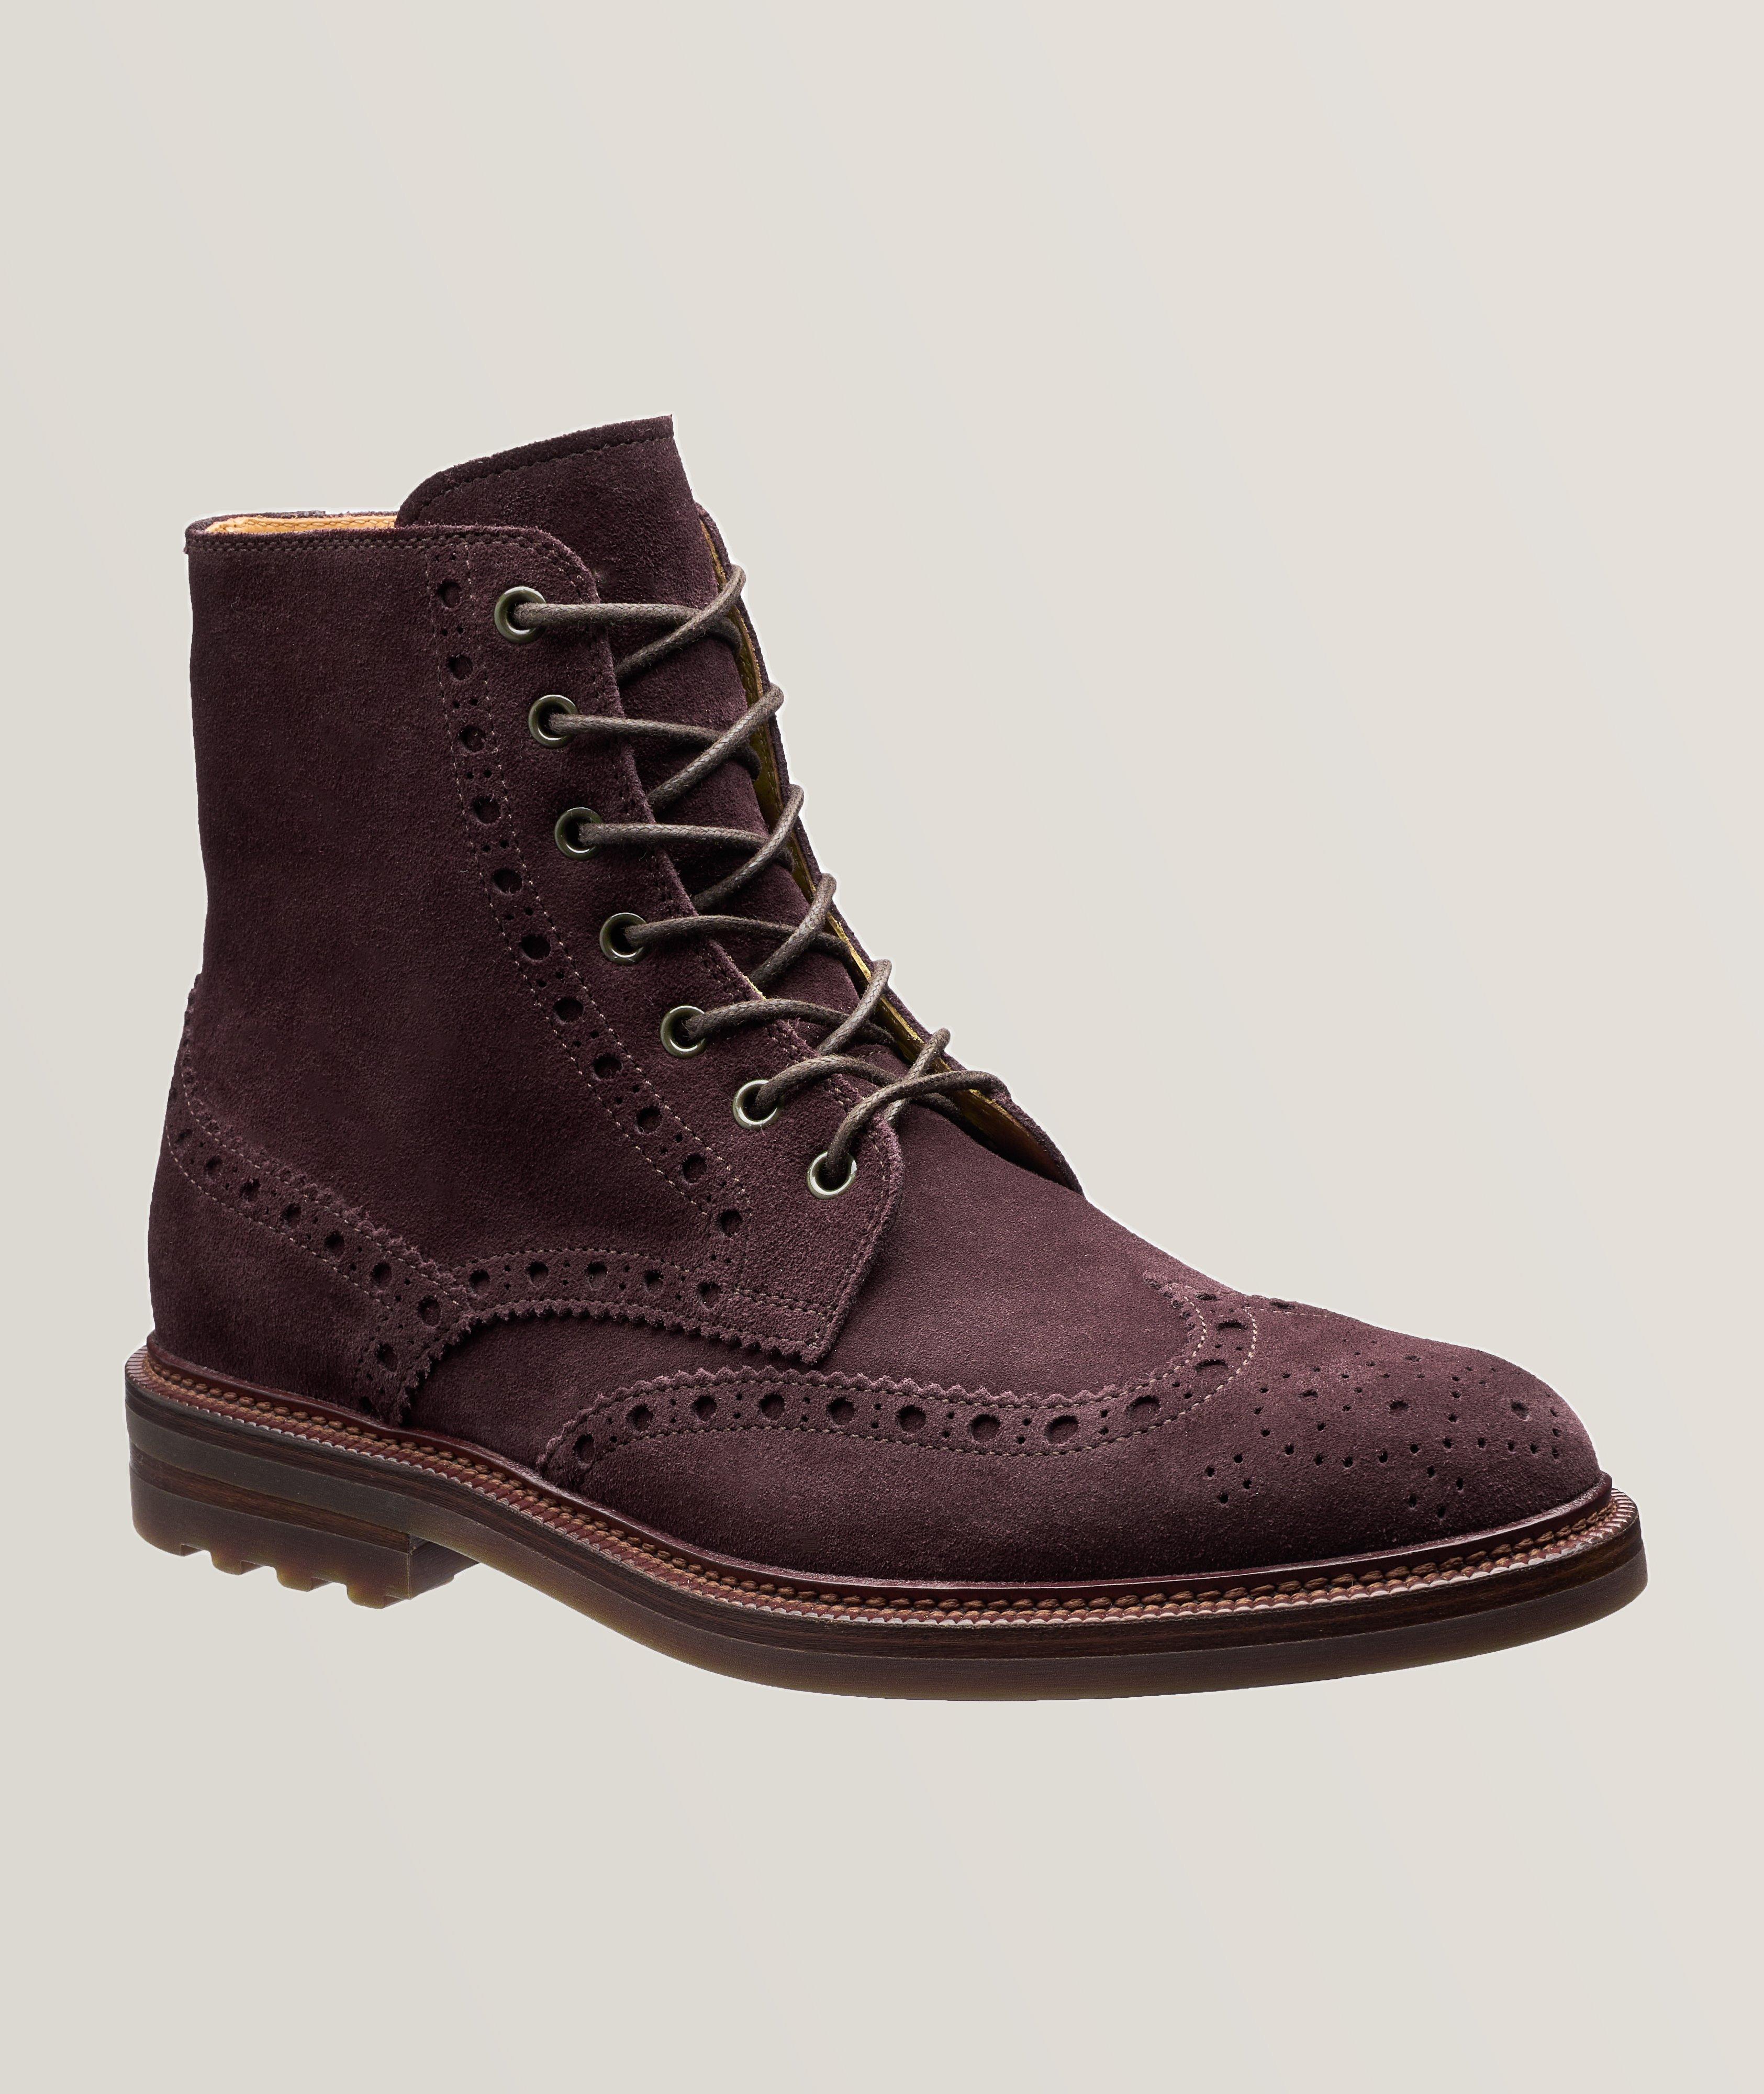 Suede Wingtip Lace-Up Boots image 0